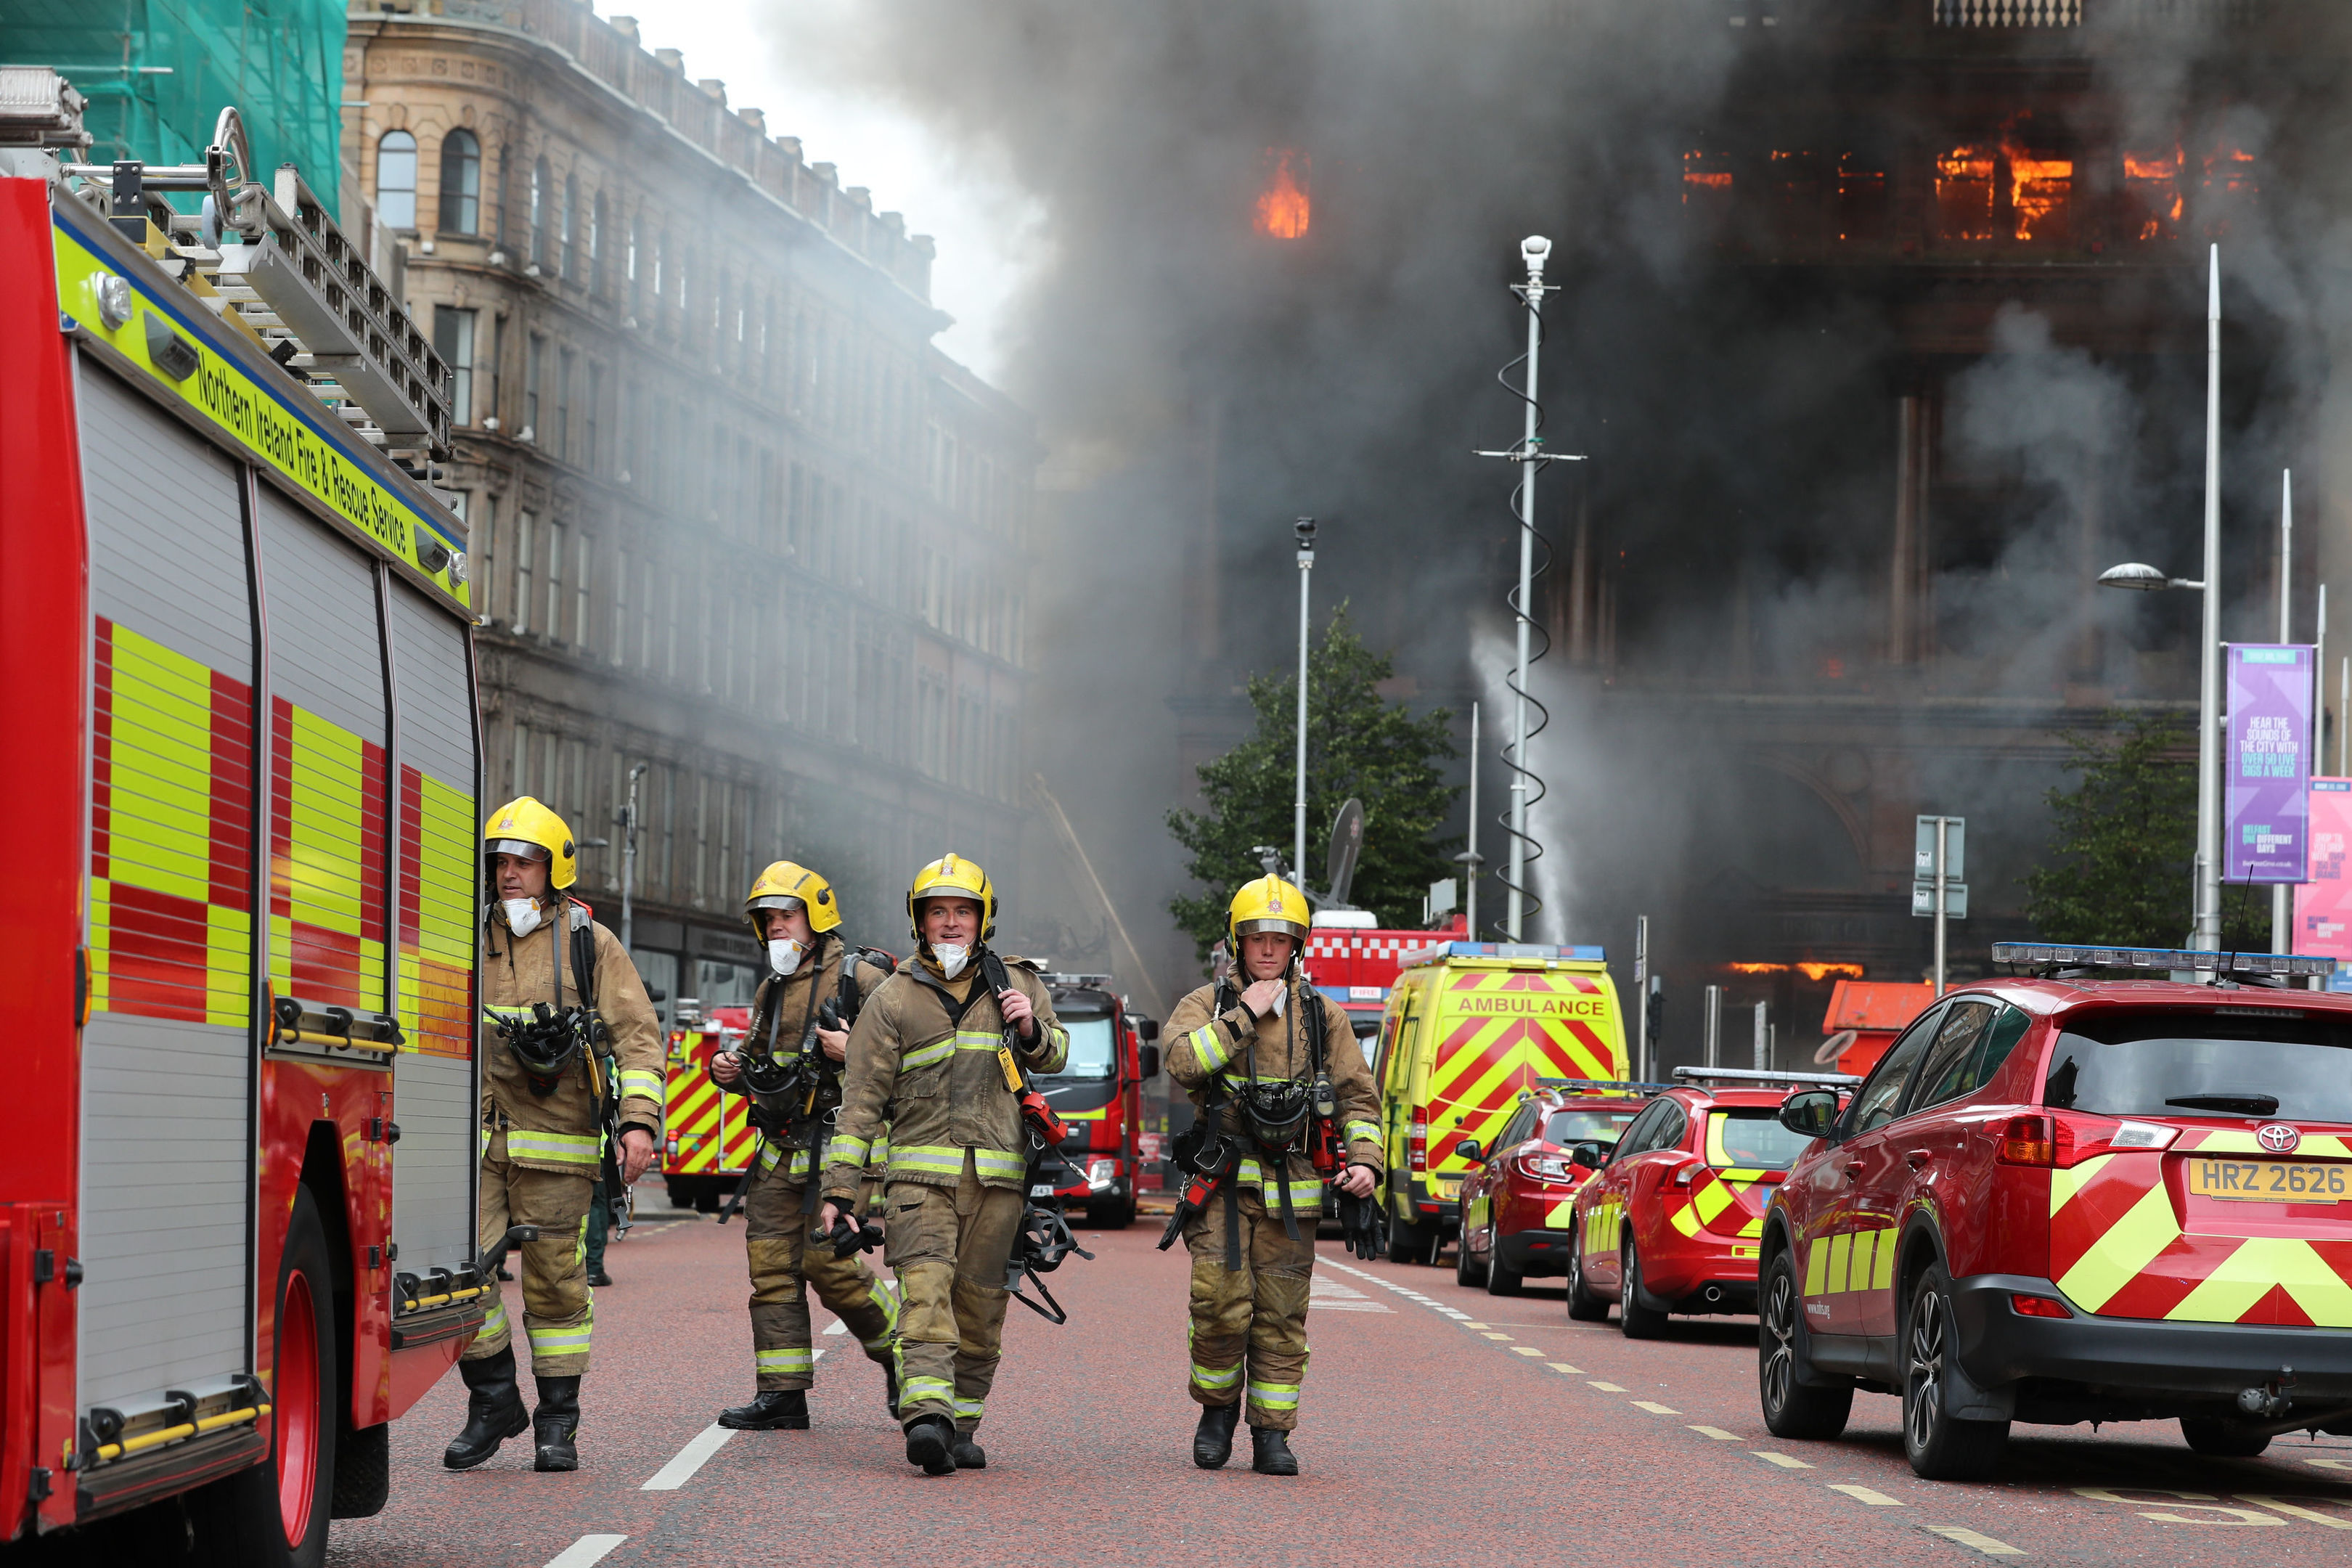 Firefighters helping to tackle a major blaze in Glasgow.